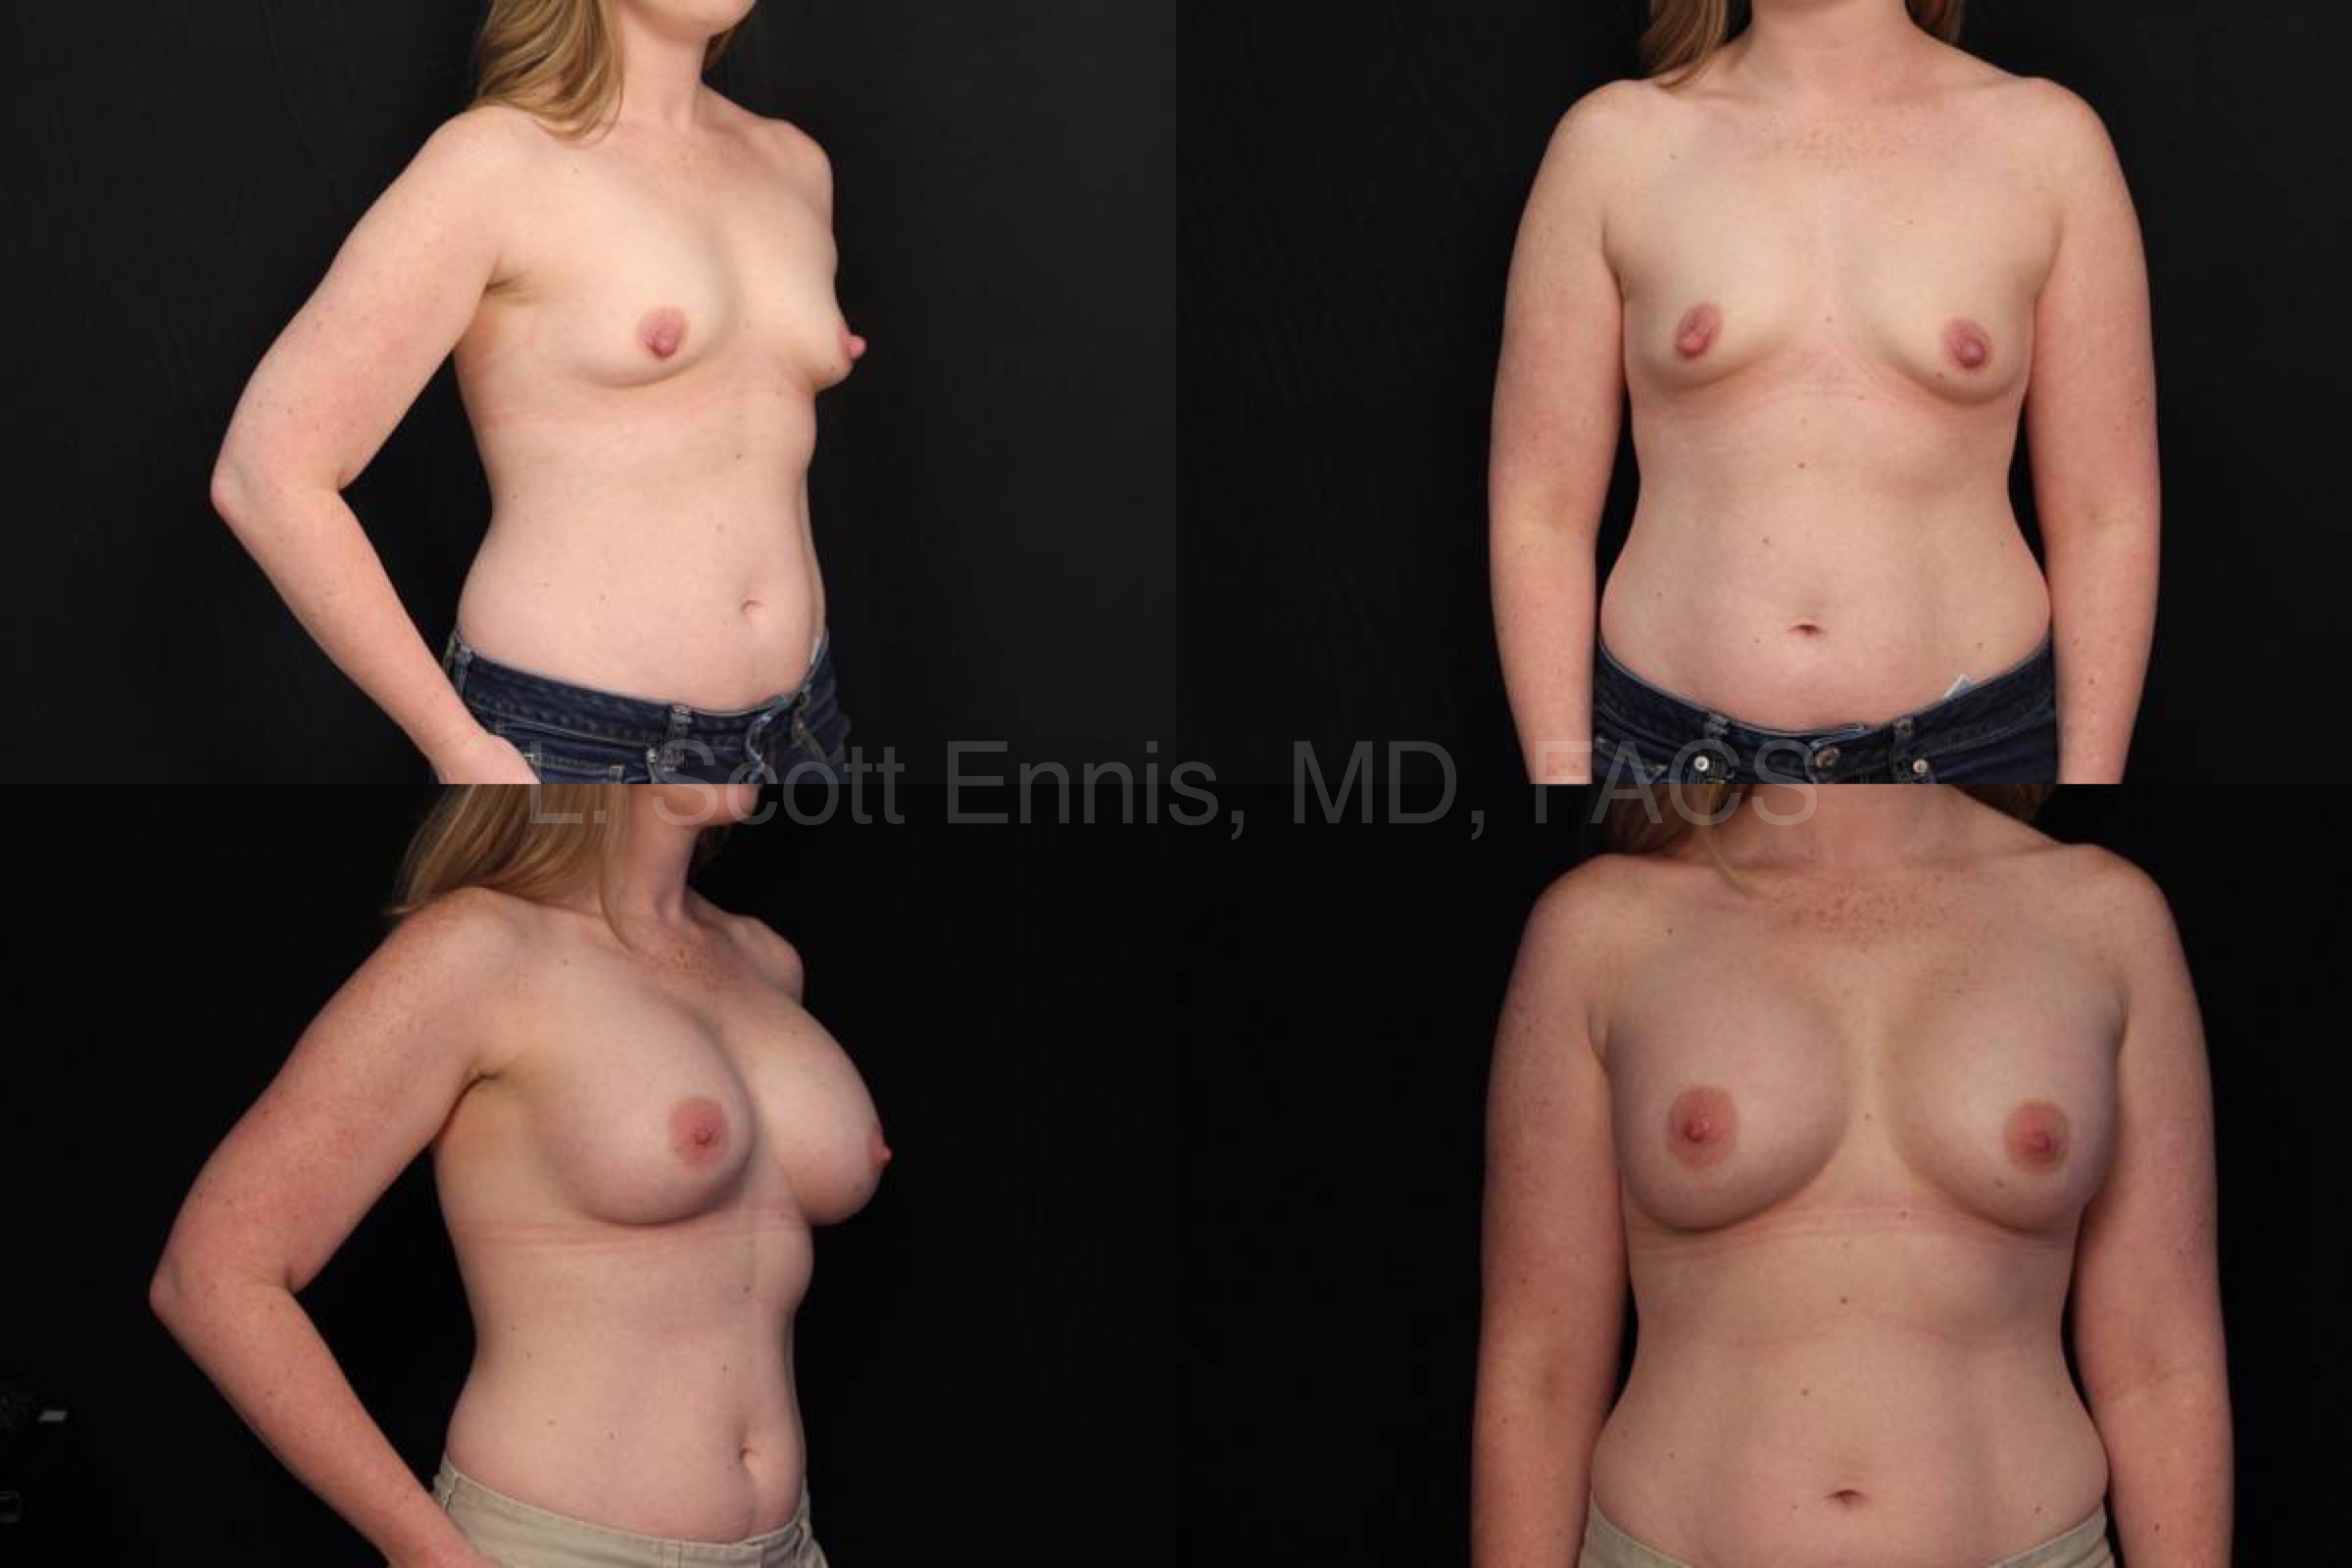 Nipple reduction with augmentation silicone gel implant Before and After Ennis Plastic Surgery Palm Beach Fort Lauderdale miami Boca Raton Destin Miami 40330